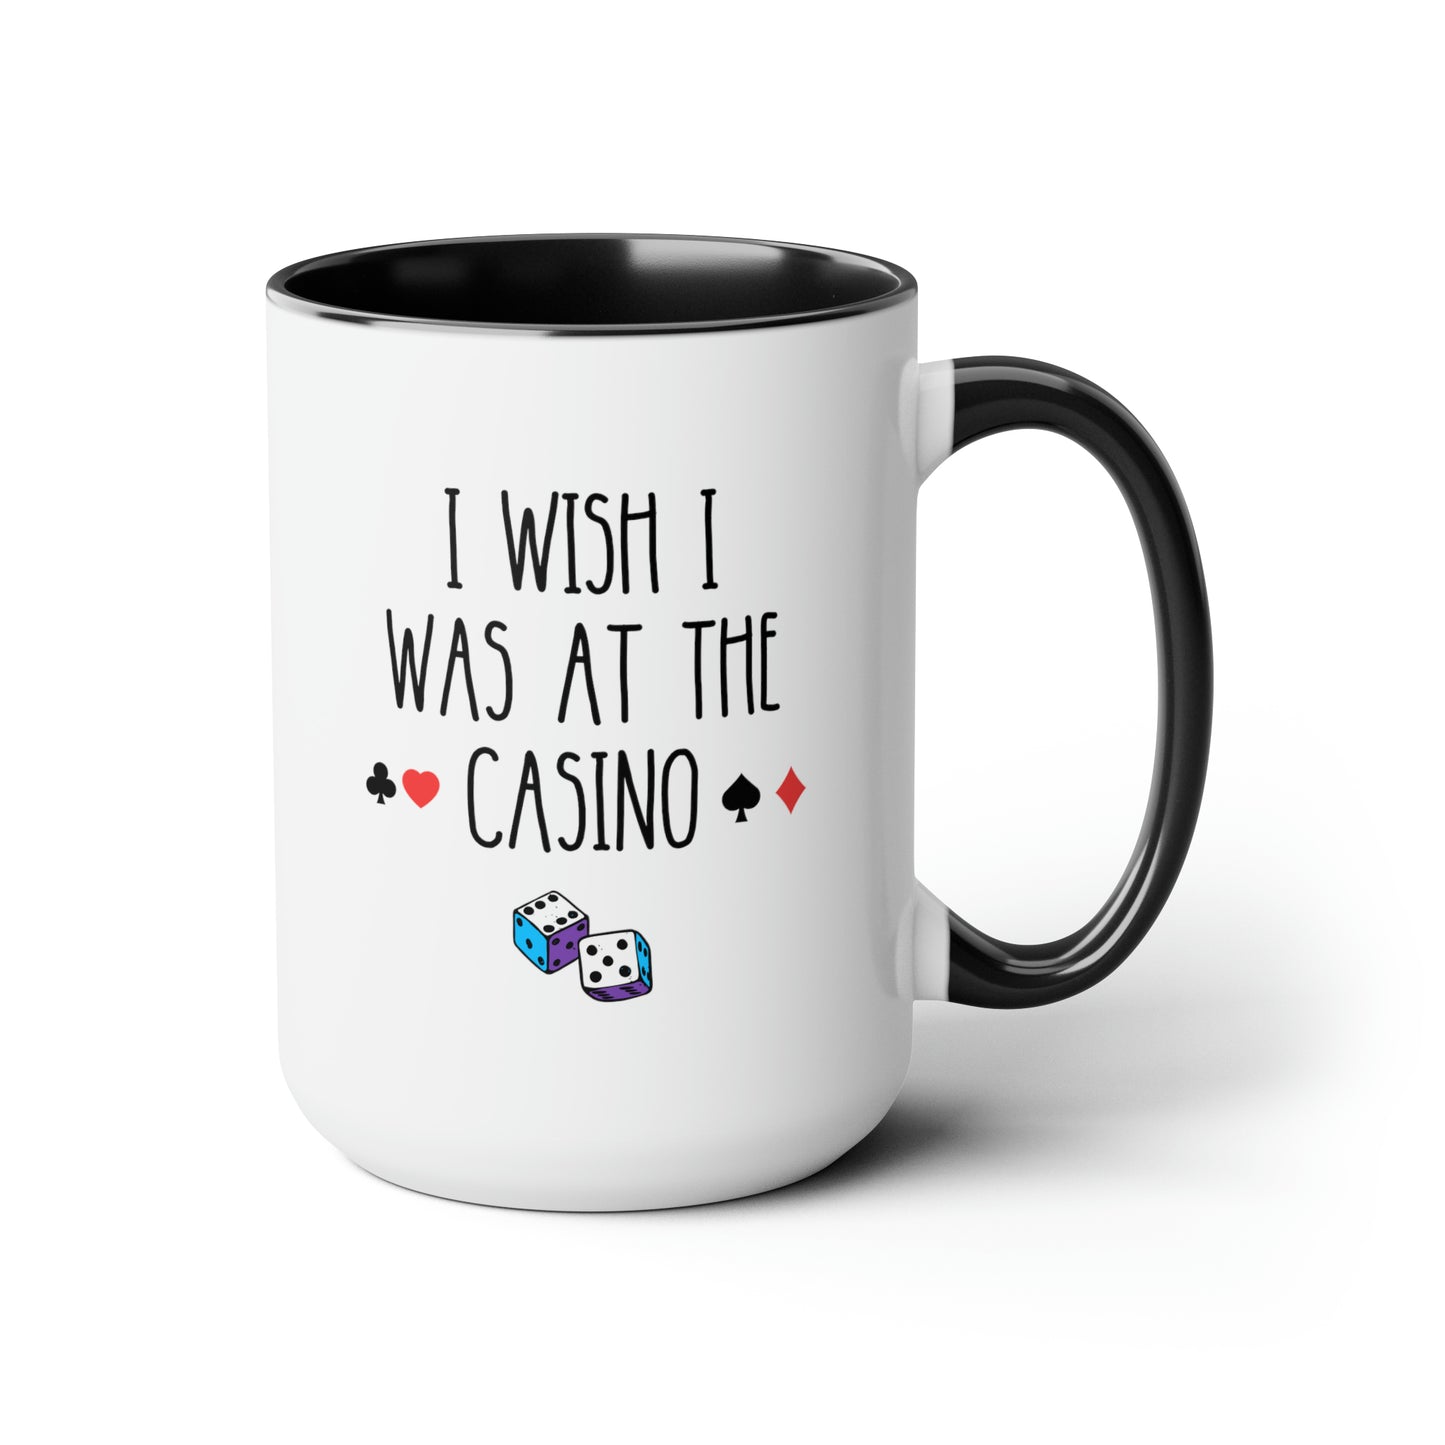 I Wish I Was At The Casino 15oz white with black accent funny large coffee mug gift for poker player gambling lover slot blackjack cup waveywares wavey wares wavywares wavy wares